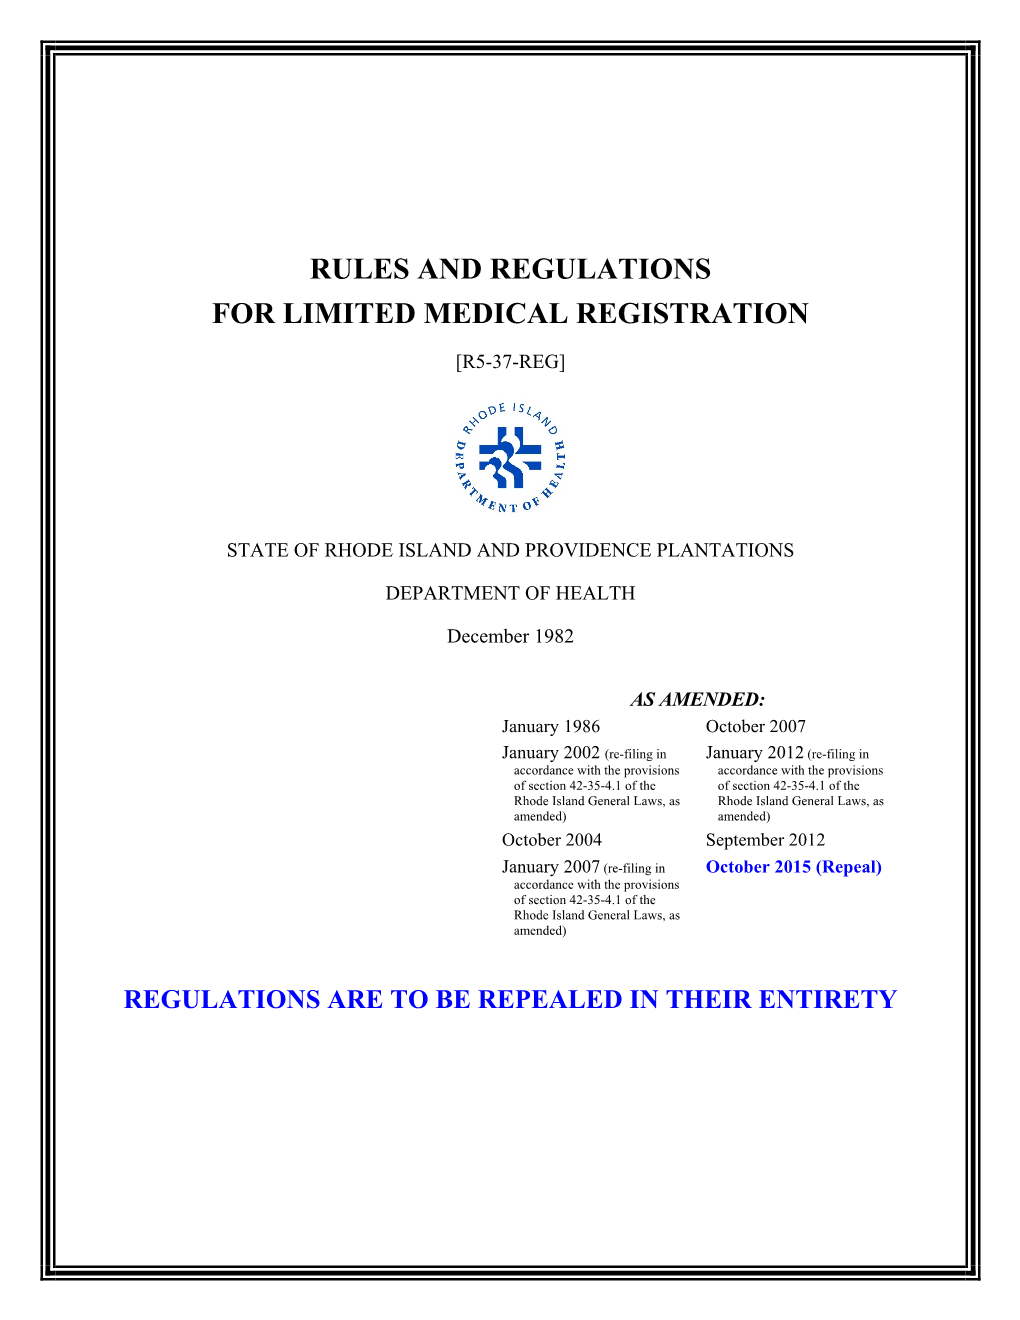 Rules and Regulations for Limited Medical Registration